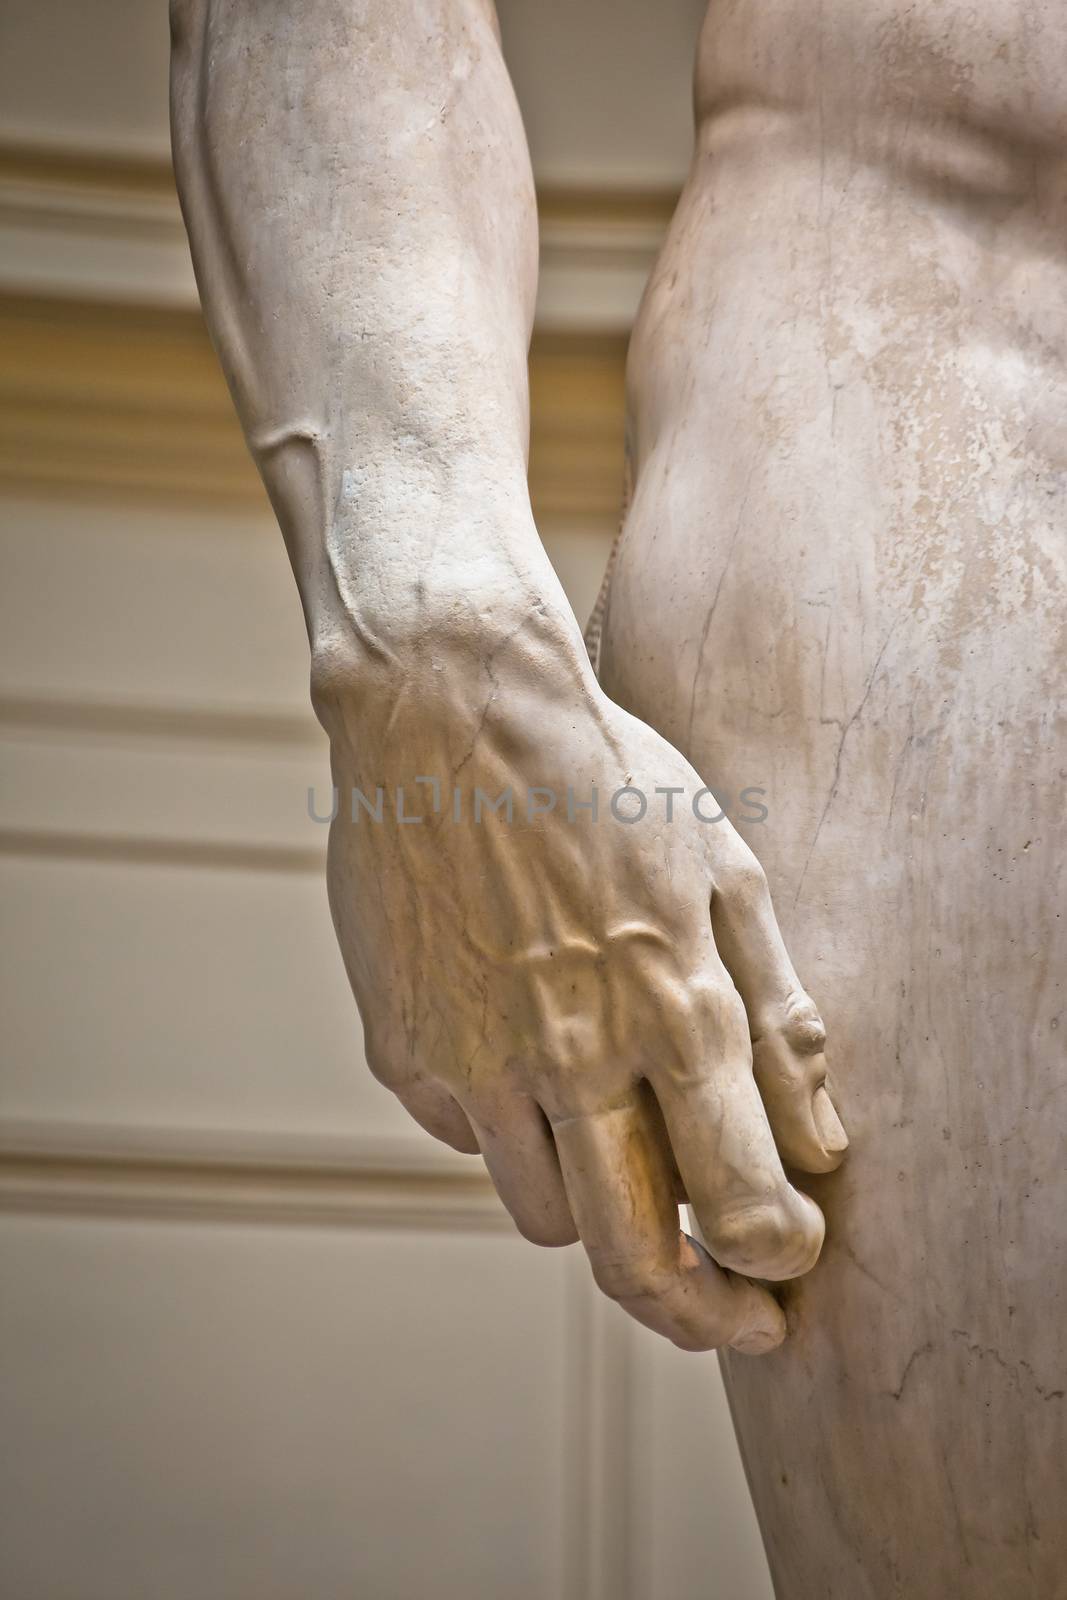 Florence, Tuscany, Italy July 18 2018: Arm detail of Statue of David, completed by Michelangelo Buonarroti in 1504, is one of the most renowned works of the Renaissance, and most famous sculpture in the world. Original statue situated in Florence Accademia in Italy